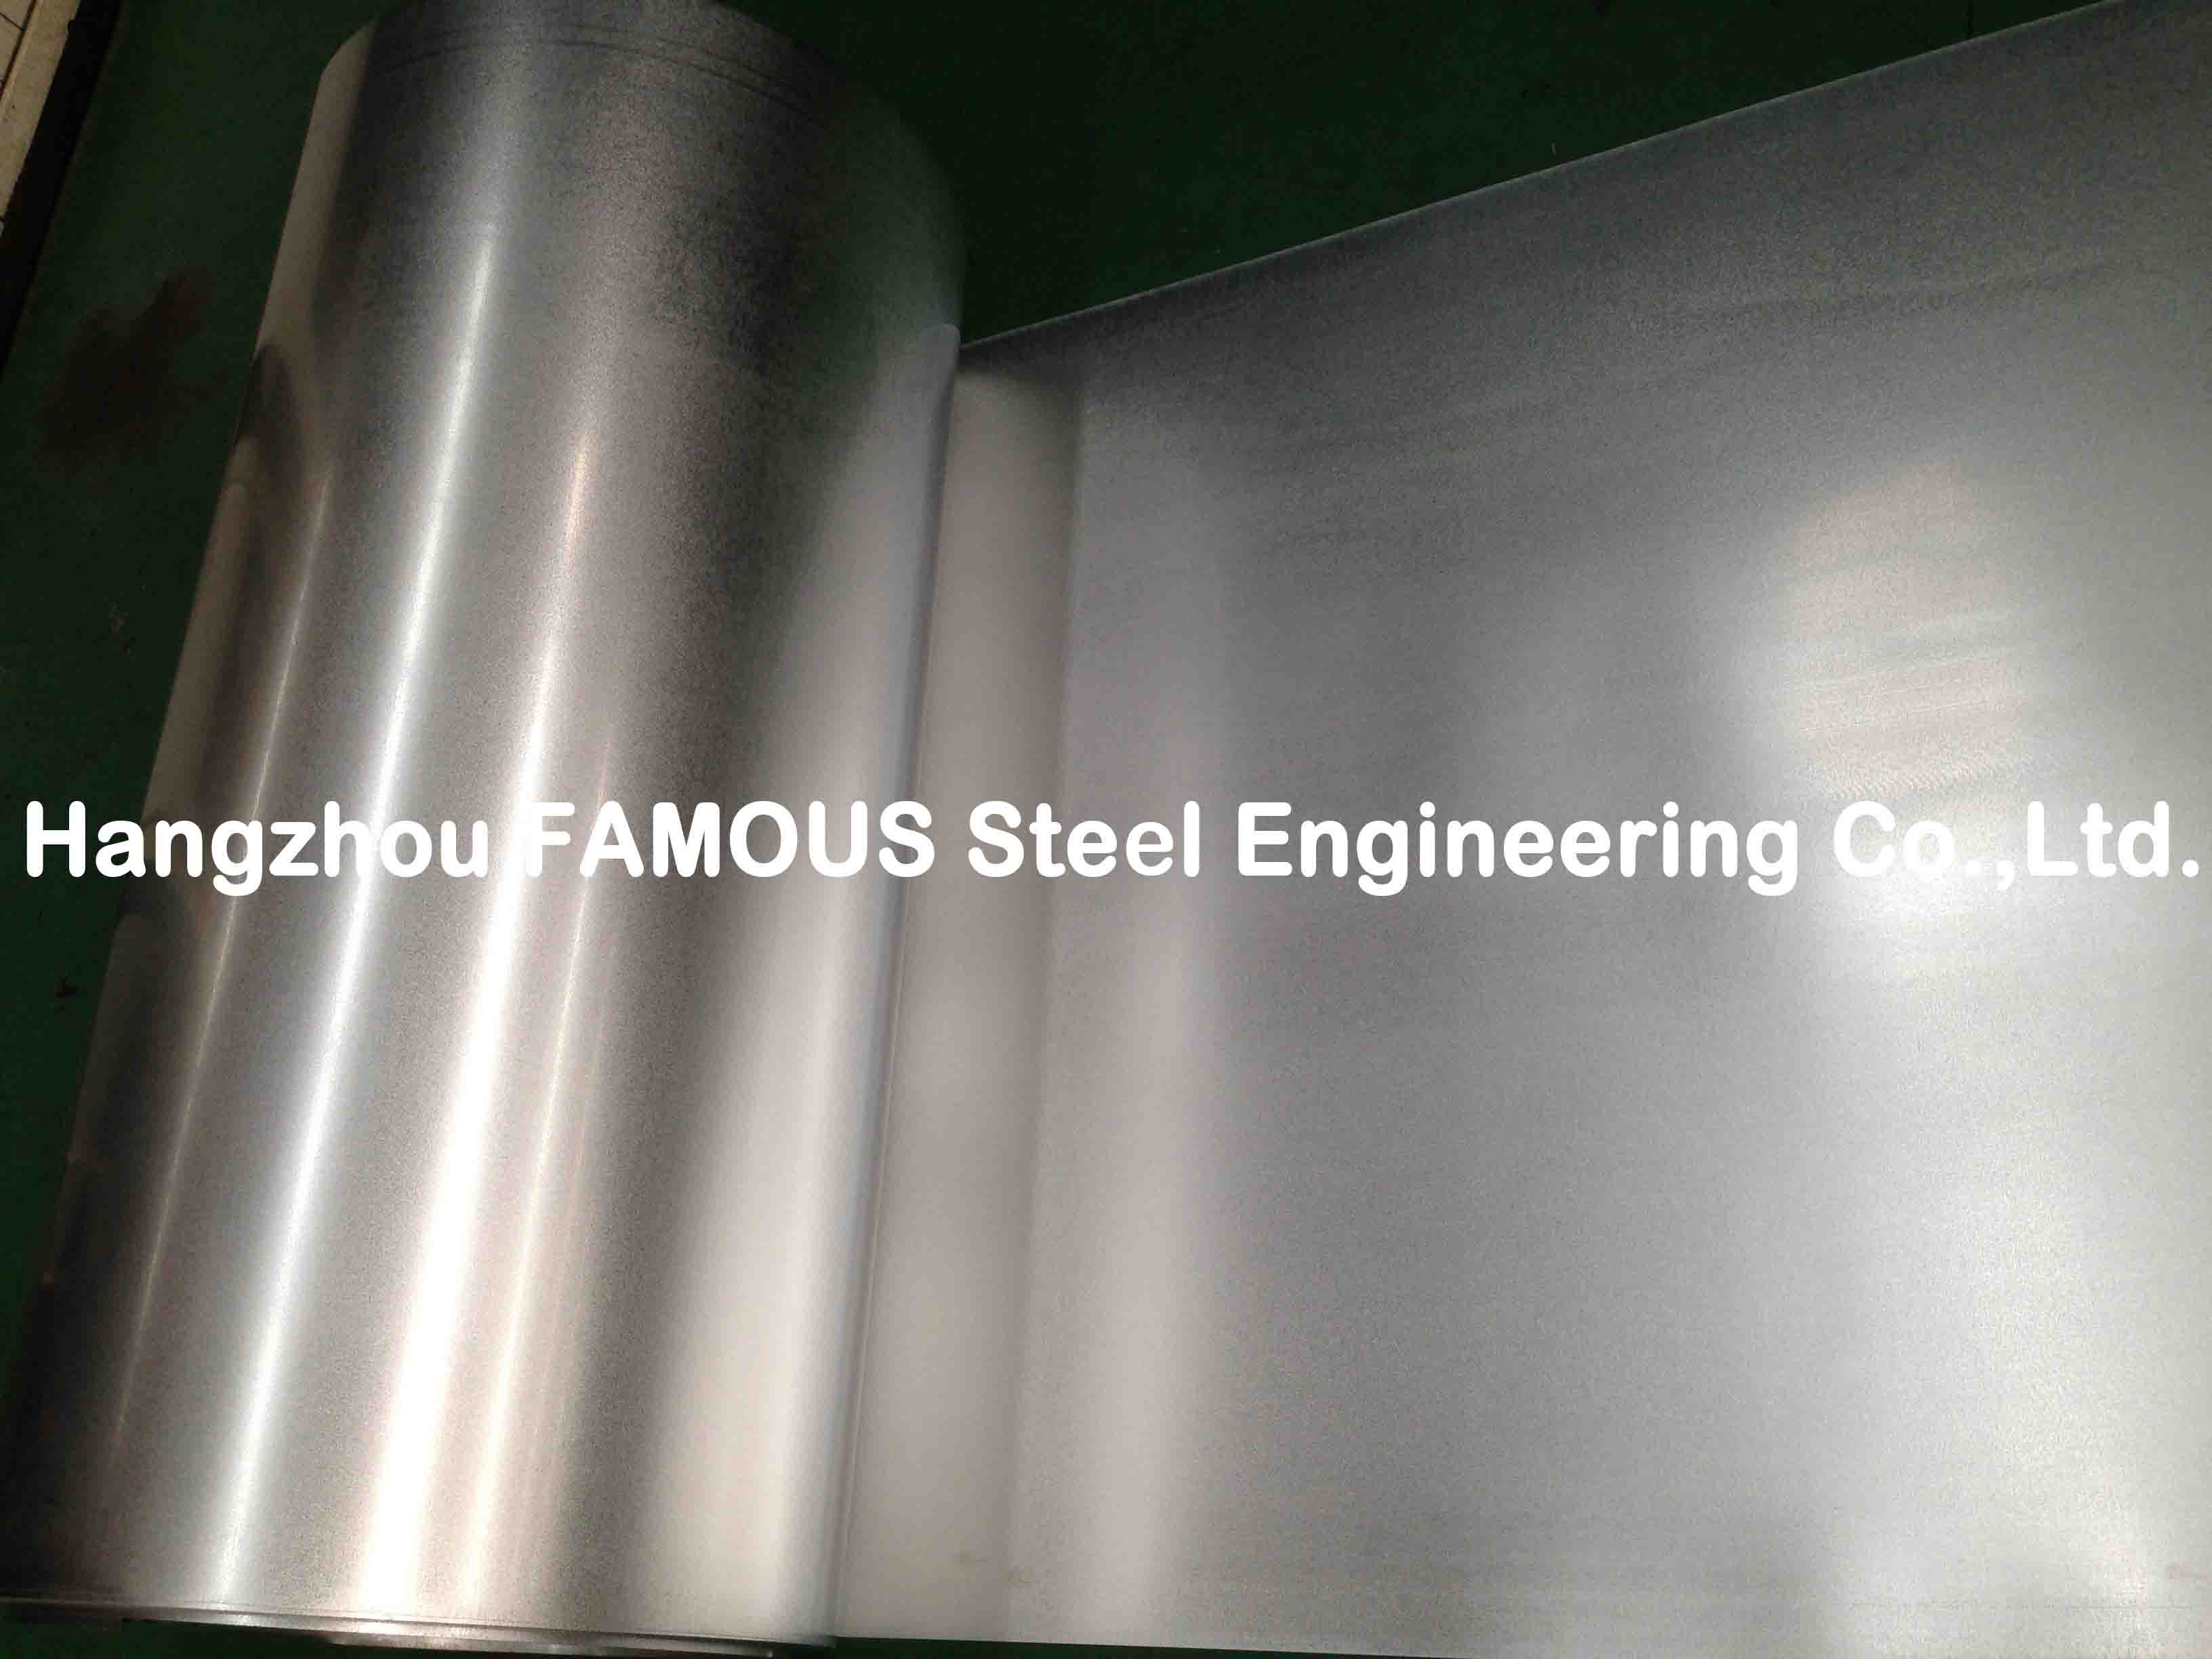 Anti-erosion Hot Dip Galvanized Steel Sheet Coil With 600mm - 1500mm Width